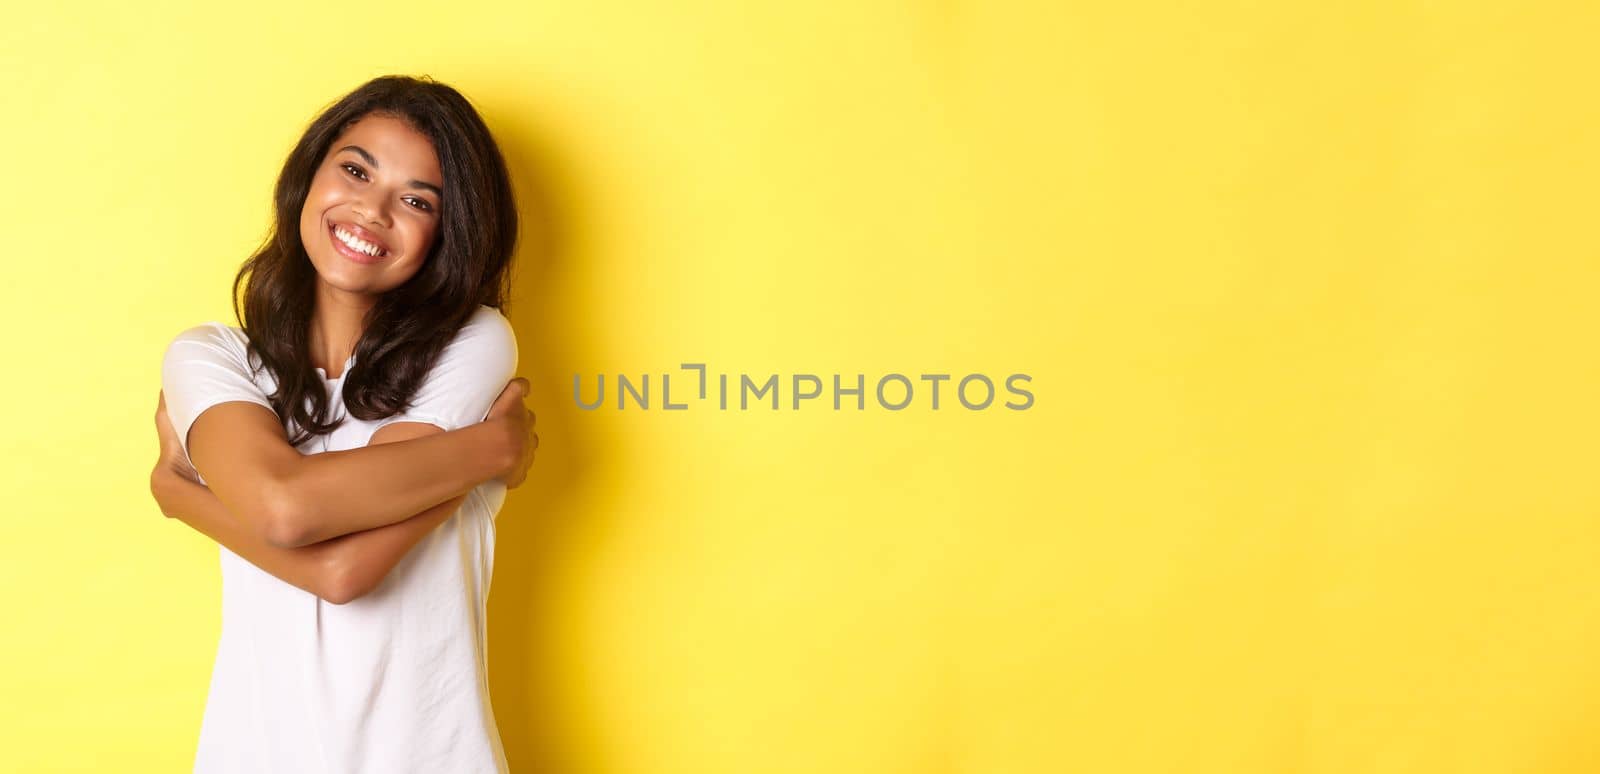 Portrait of cheerful african american woman, hugging herself and smiling pleased, standing over yellow background.